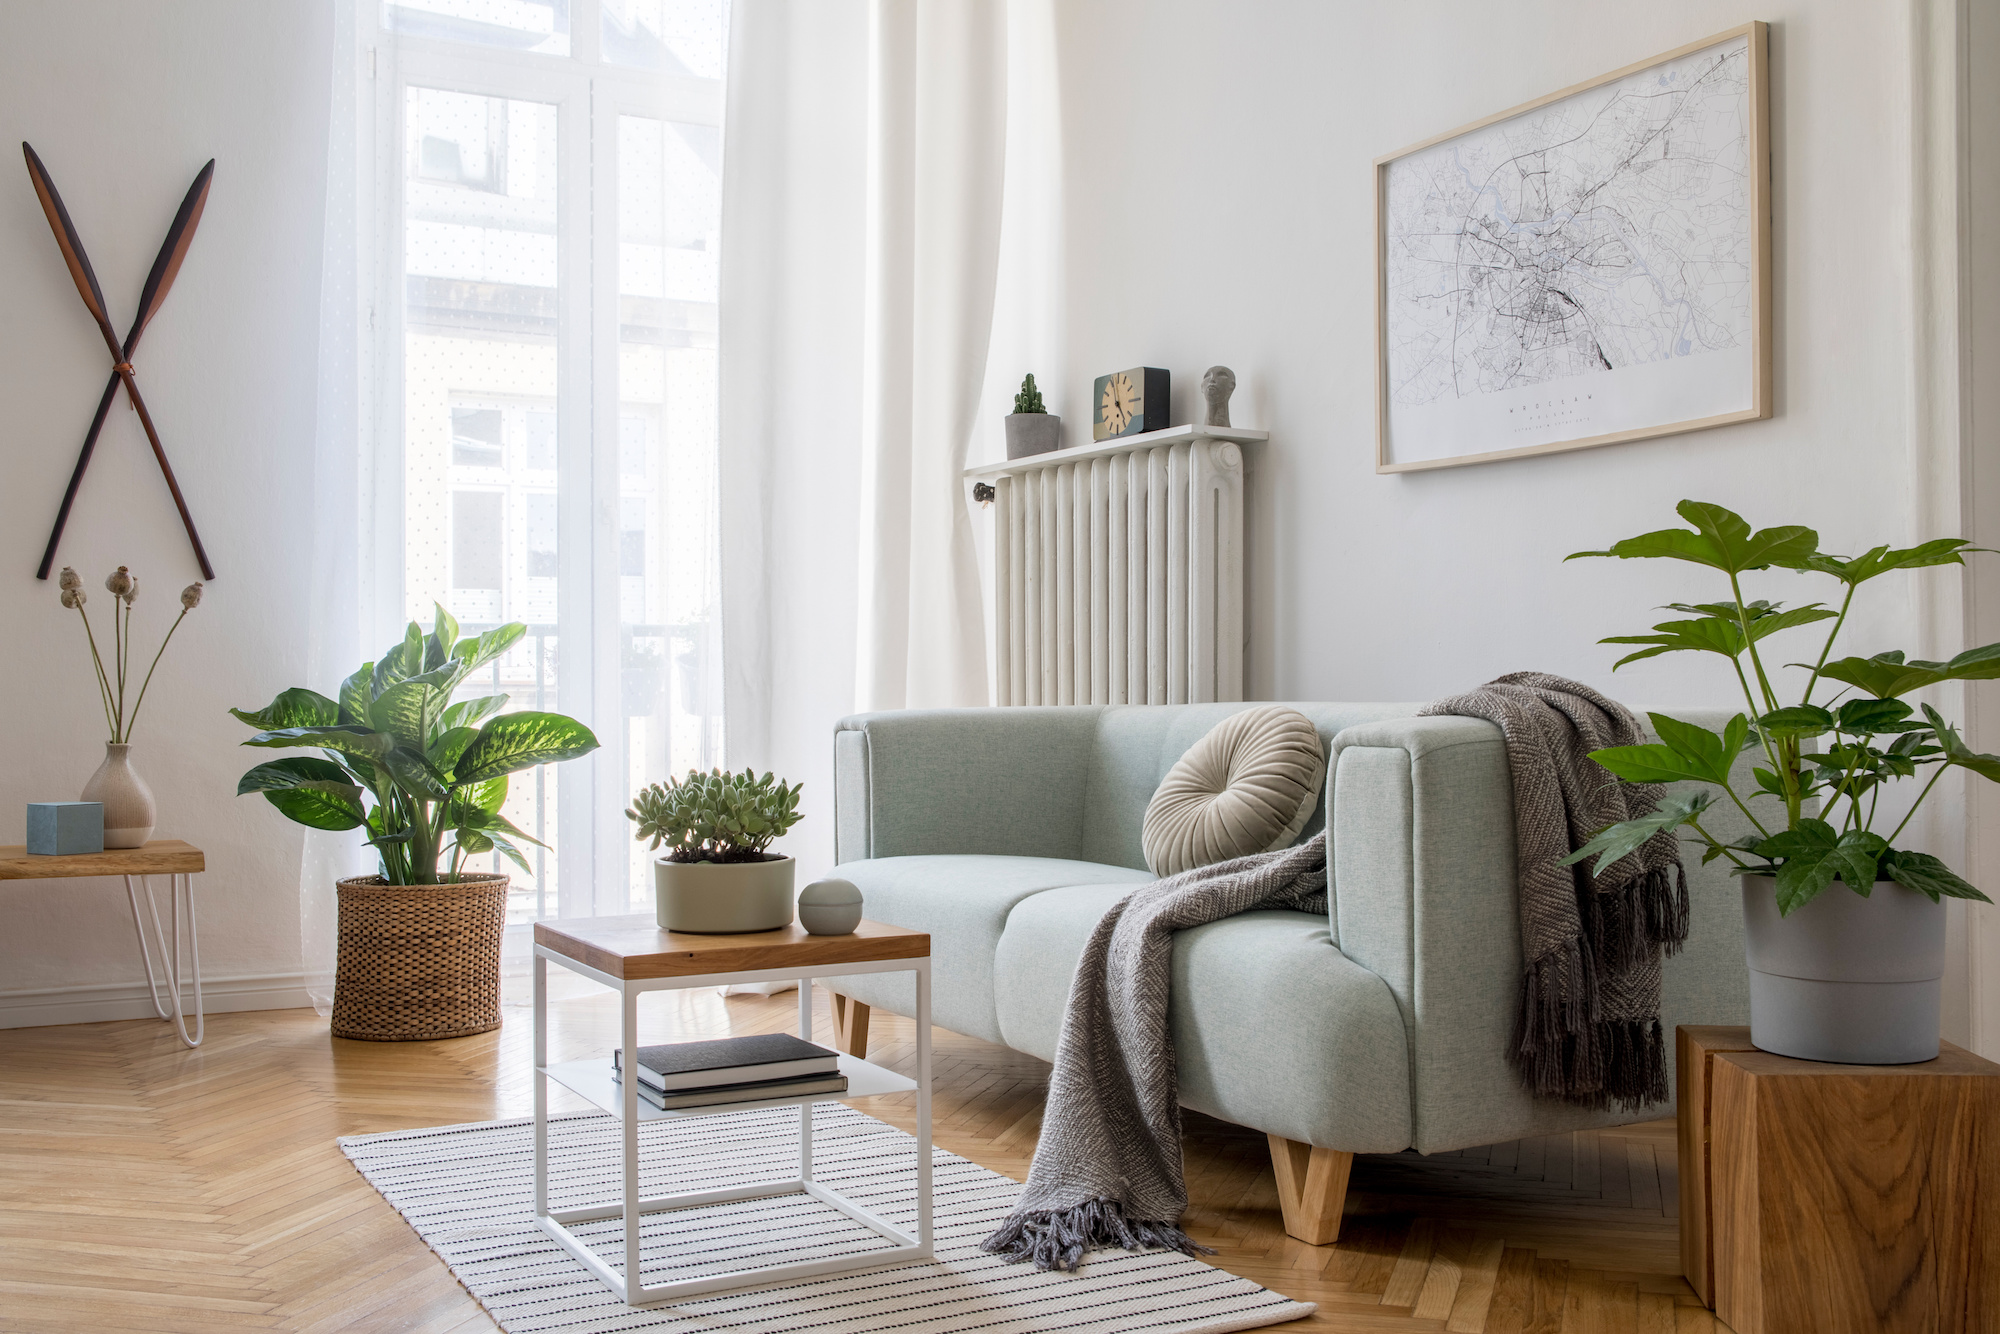 5 Essential Items to Buy for Your Small Apartment